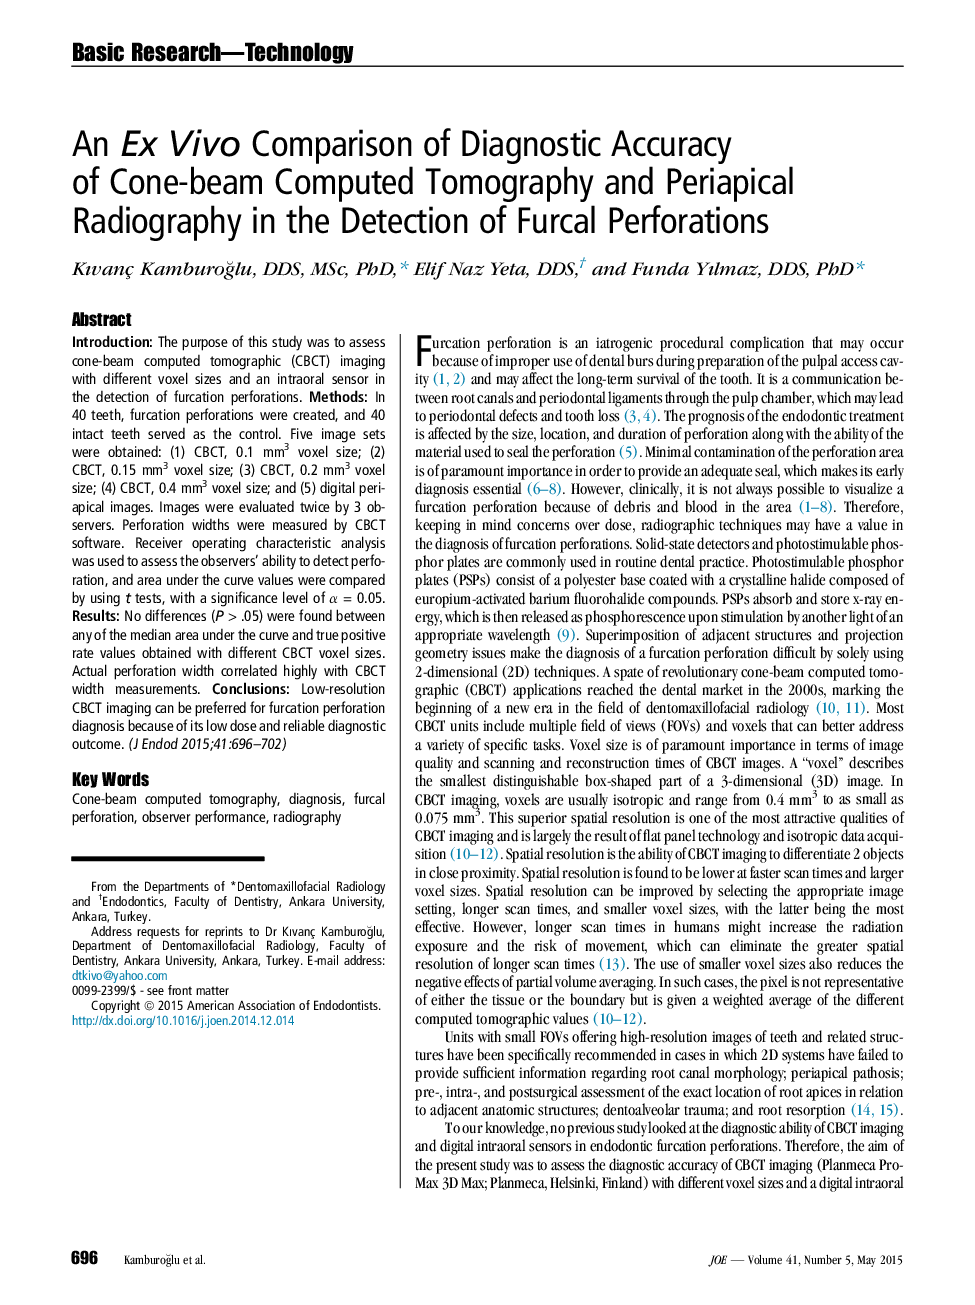 An Ex Vivo Comparison of Diagnostic Accuracy of Cone-beam Computed Tomography and Periapical Radiography in the Detection of Furcal Perforations